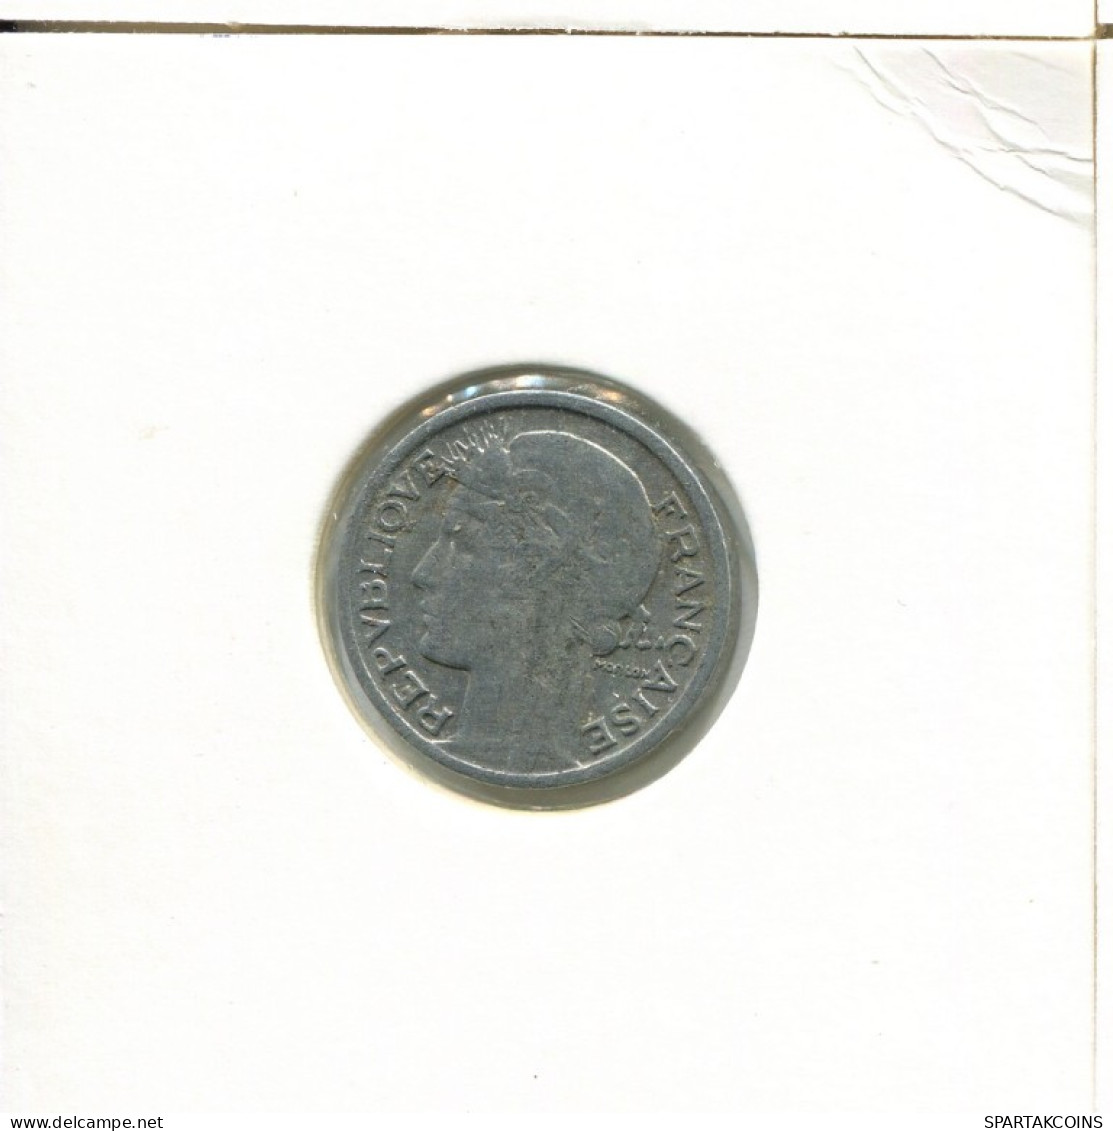 50 CENTIMES 1943 C FRANCE French Coin #AK920.U.A - 50 Centimes